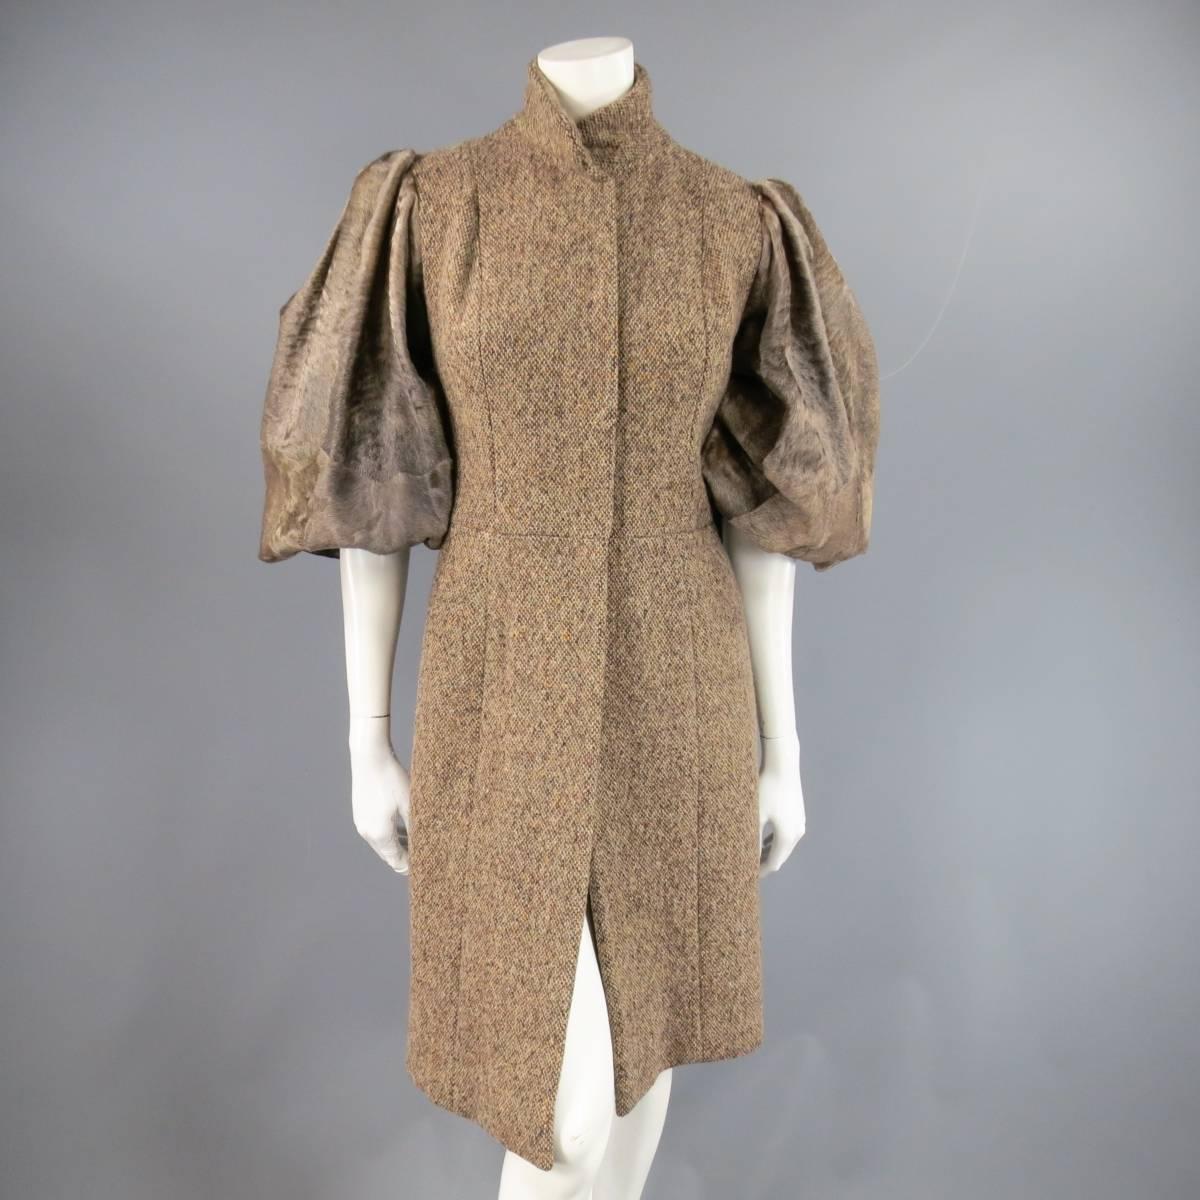 Gorgeous brown tweed winter coat by PETROU in a taupe brown tweed featuring a high collar, four lace covered snap closure, A-line skirt, organza overlay satin lining, and brown cowhide balloon sleeves.
 
Excellent Pre-Owned Condition.
